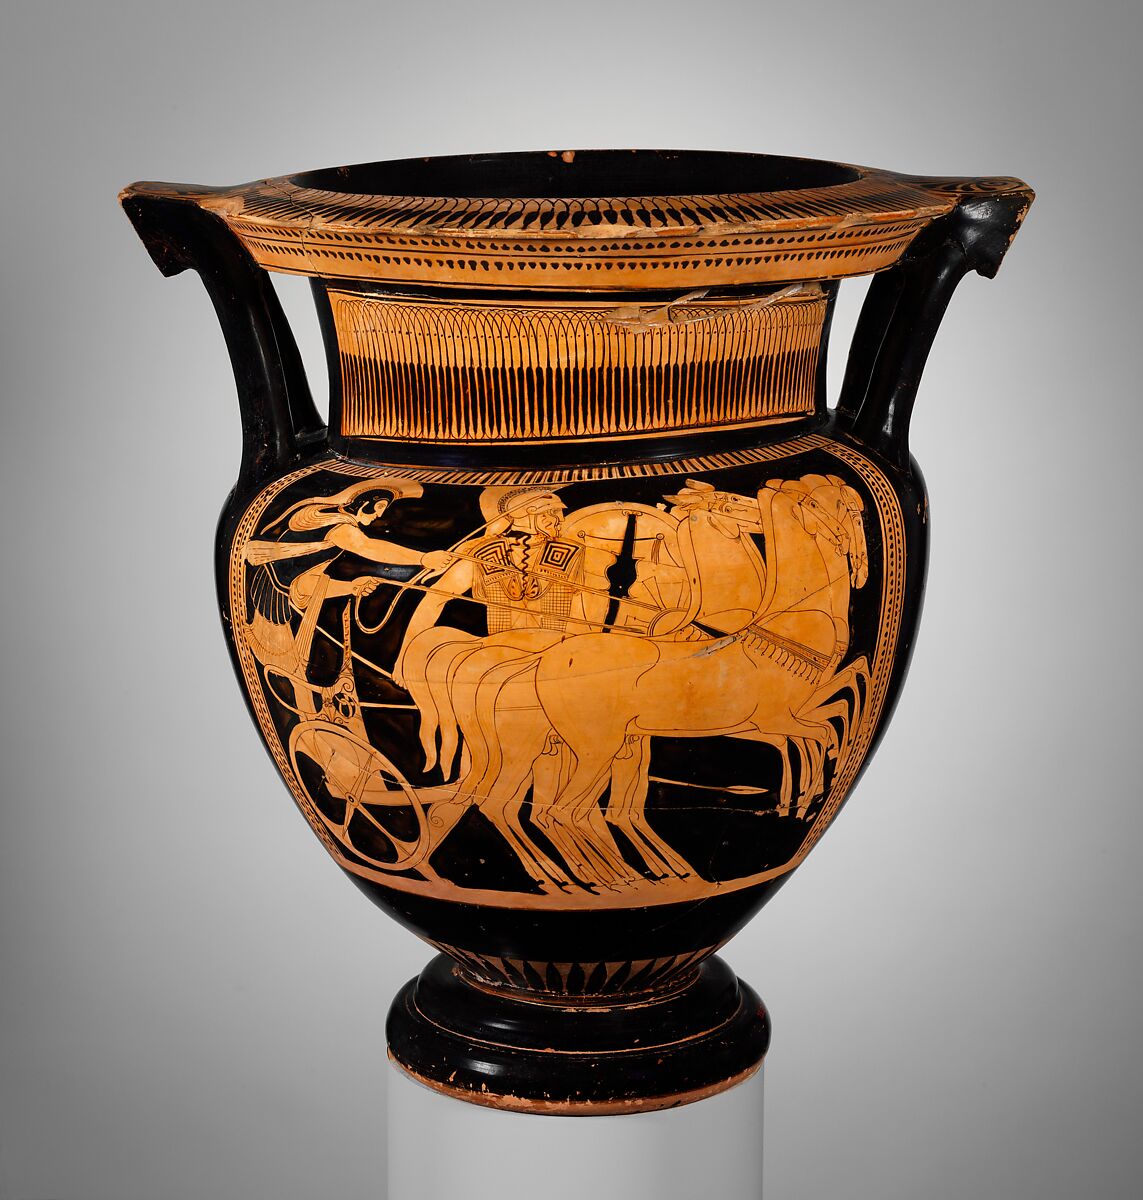 Terracotta column-krater (bowl for mixing wine and water), Attributed to the Painter of Bologna 228, Terracotta, Greek, Attic 